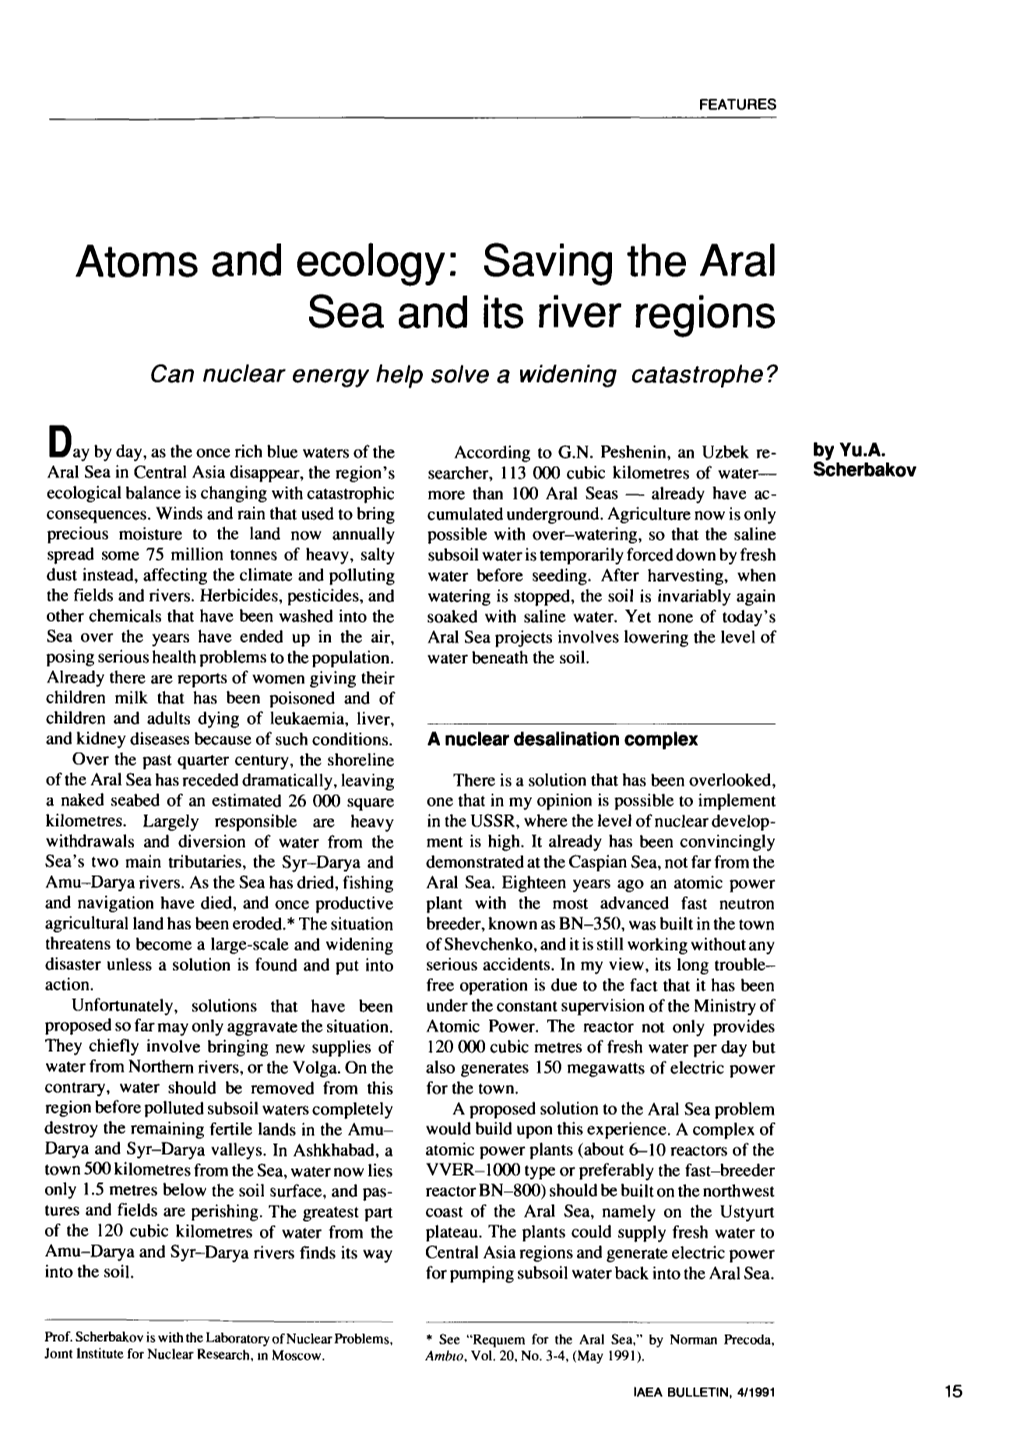 Atoms and Ecology: Saving the Aral Sea and Its River Regions